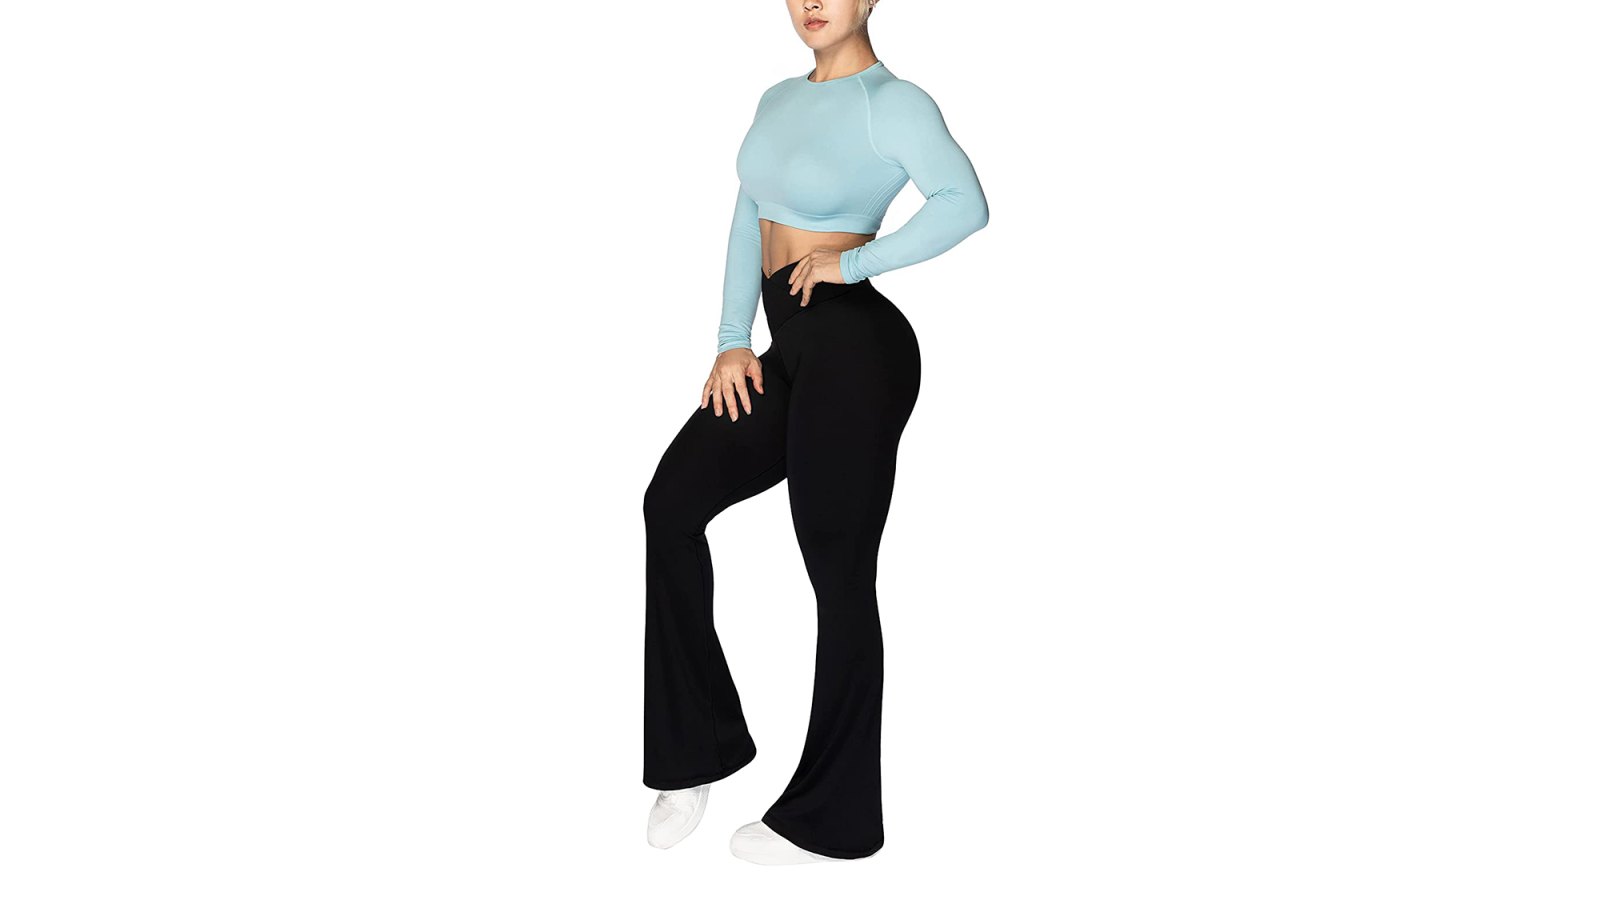 Sunzel Flare Leggings Crossover Yoga Pants with Tummy Control High-Waisted  an